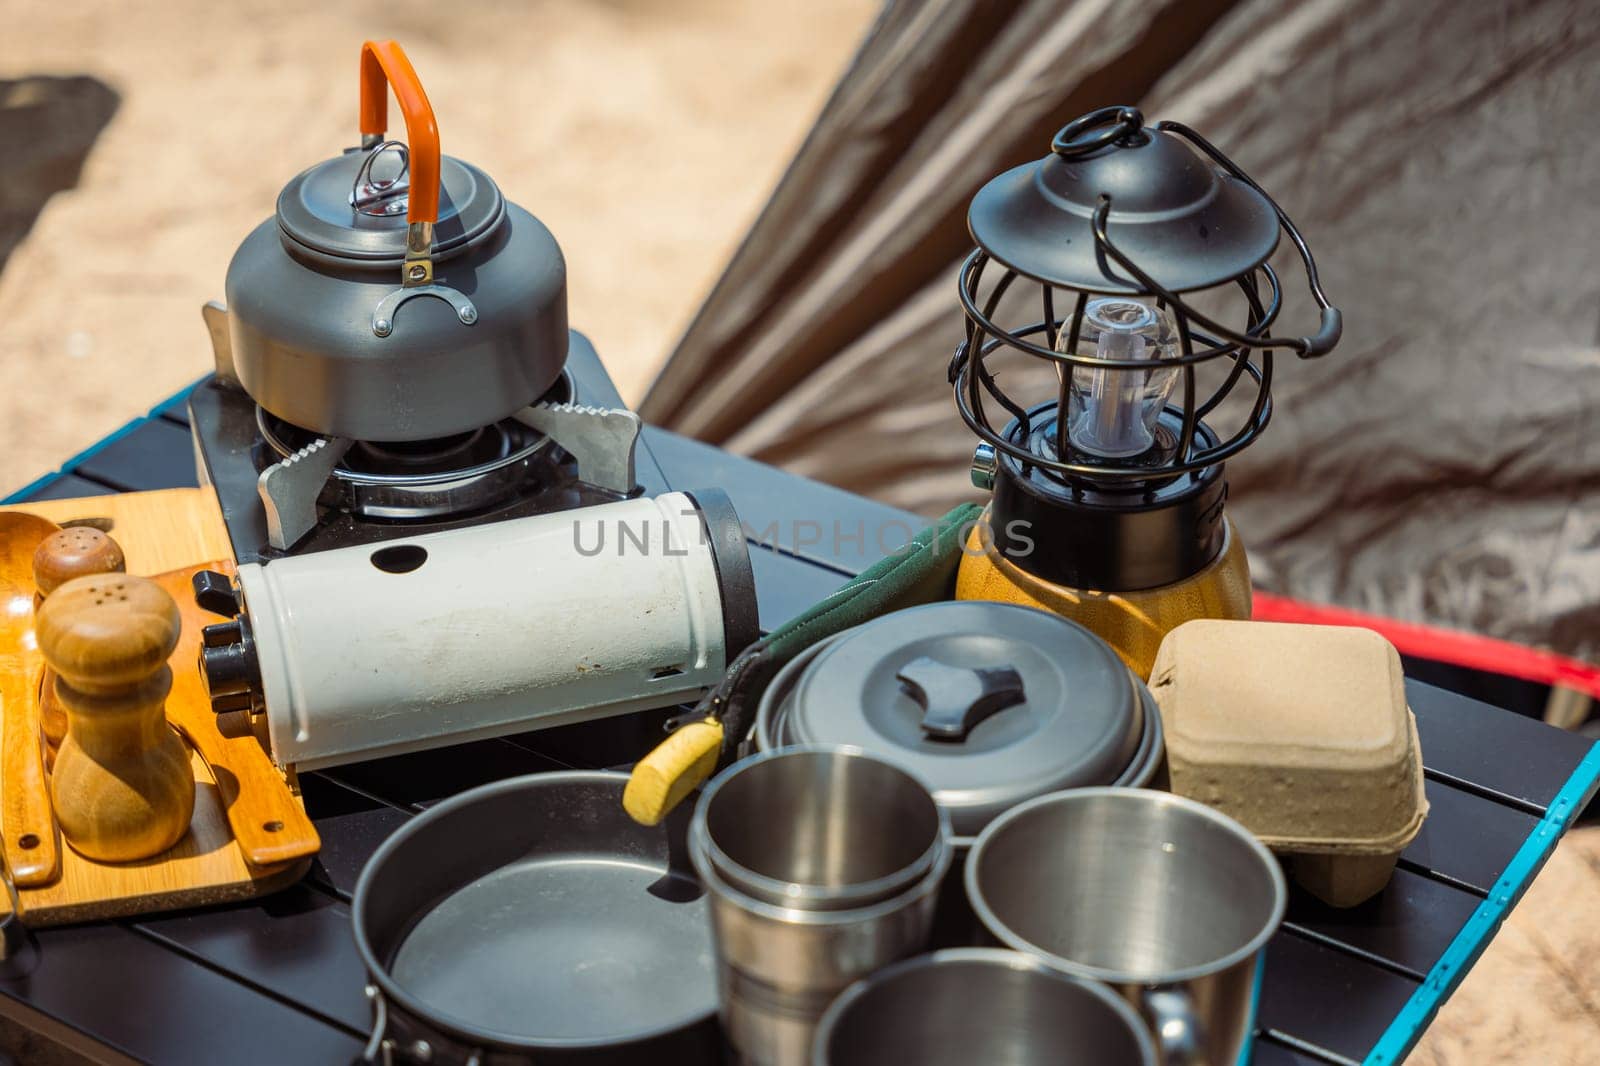 Camping essentials neatly arranged at a beachfront tent, kettle, pot, pan, gas stove, flashlight, and camera. Perfect setup for a relaxing outdoor journey in nature.